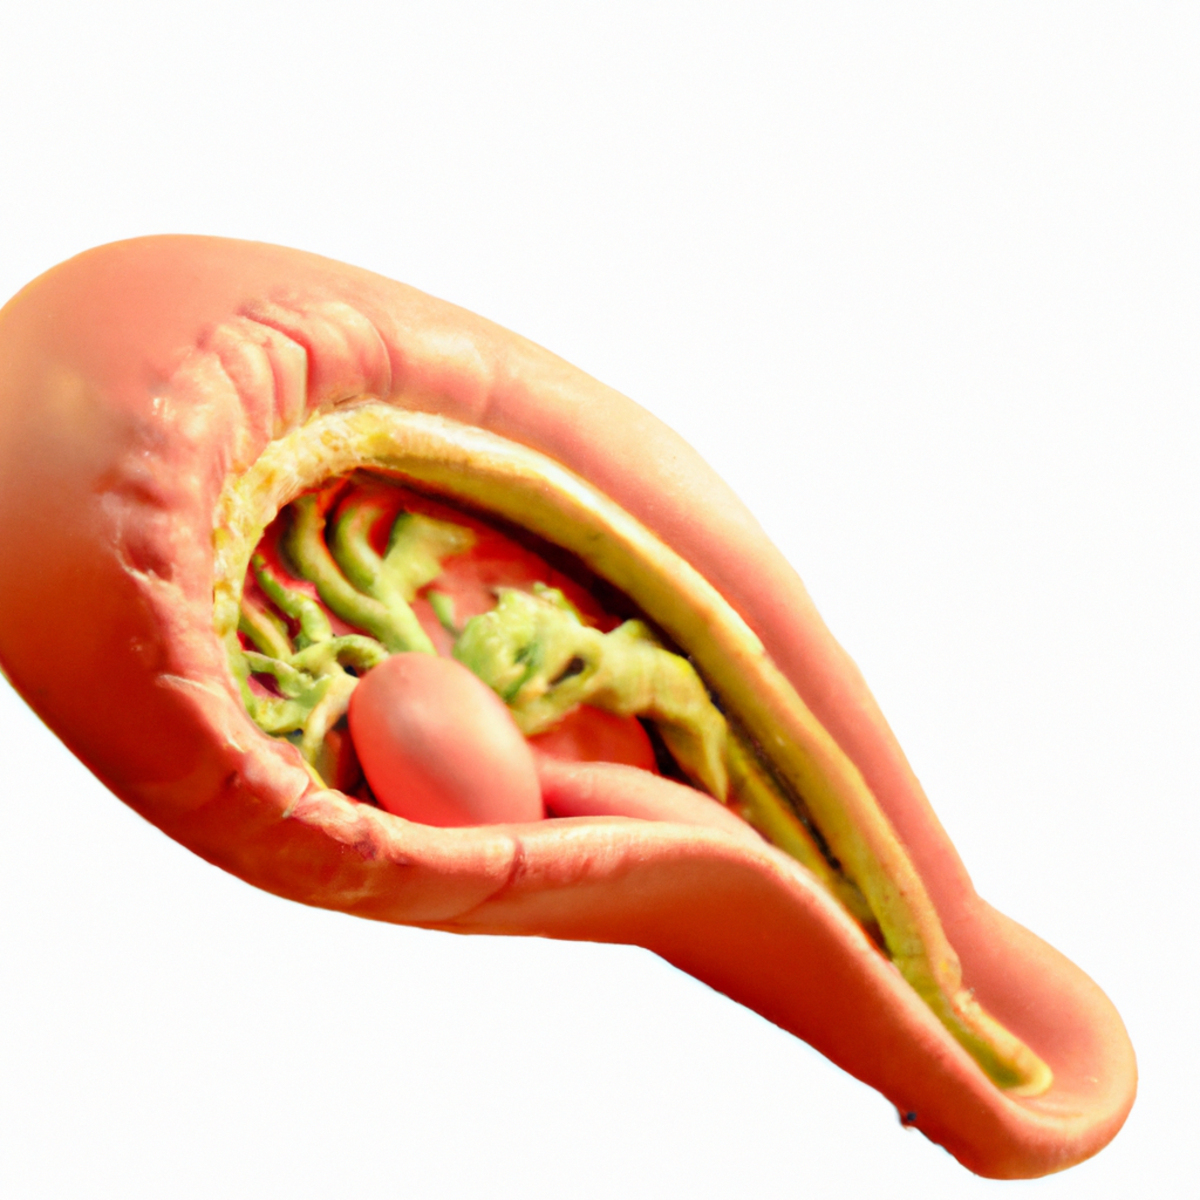 Close-up of high-quality medical model of gallbladder on white background, highlighting intricate details and absence, emphasizing gallbladder agenesis.